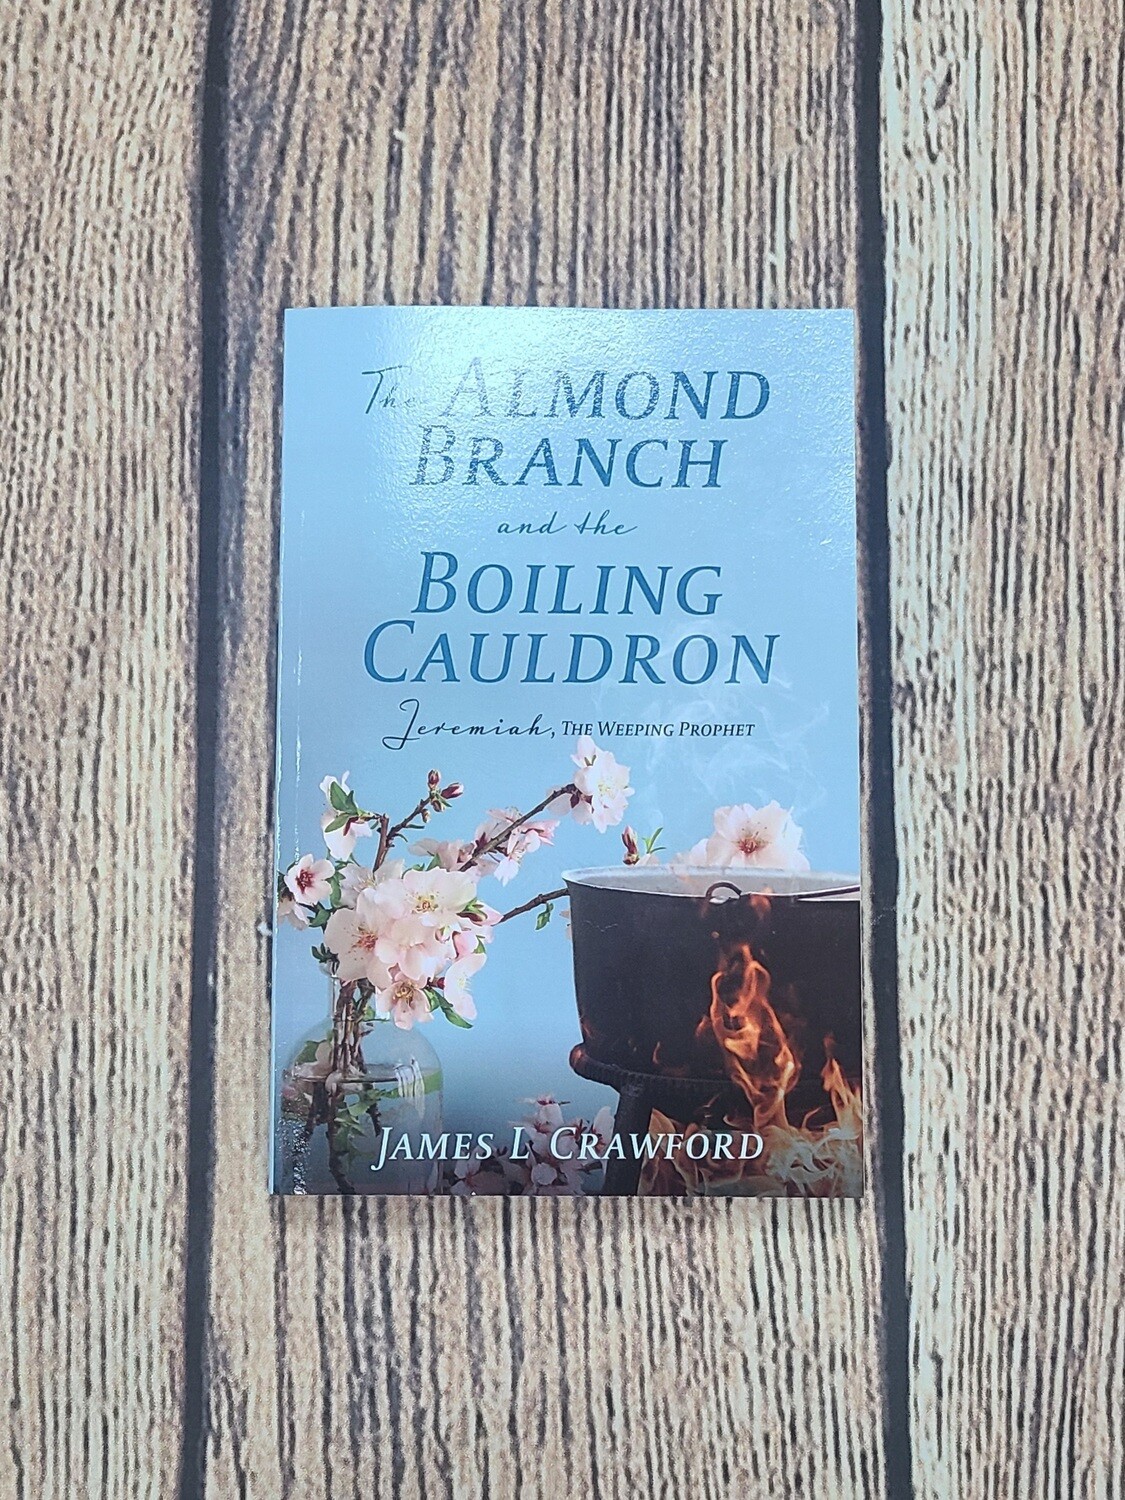 Almond Branch and the Boiling Cauldron by James L Crawford